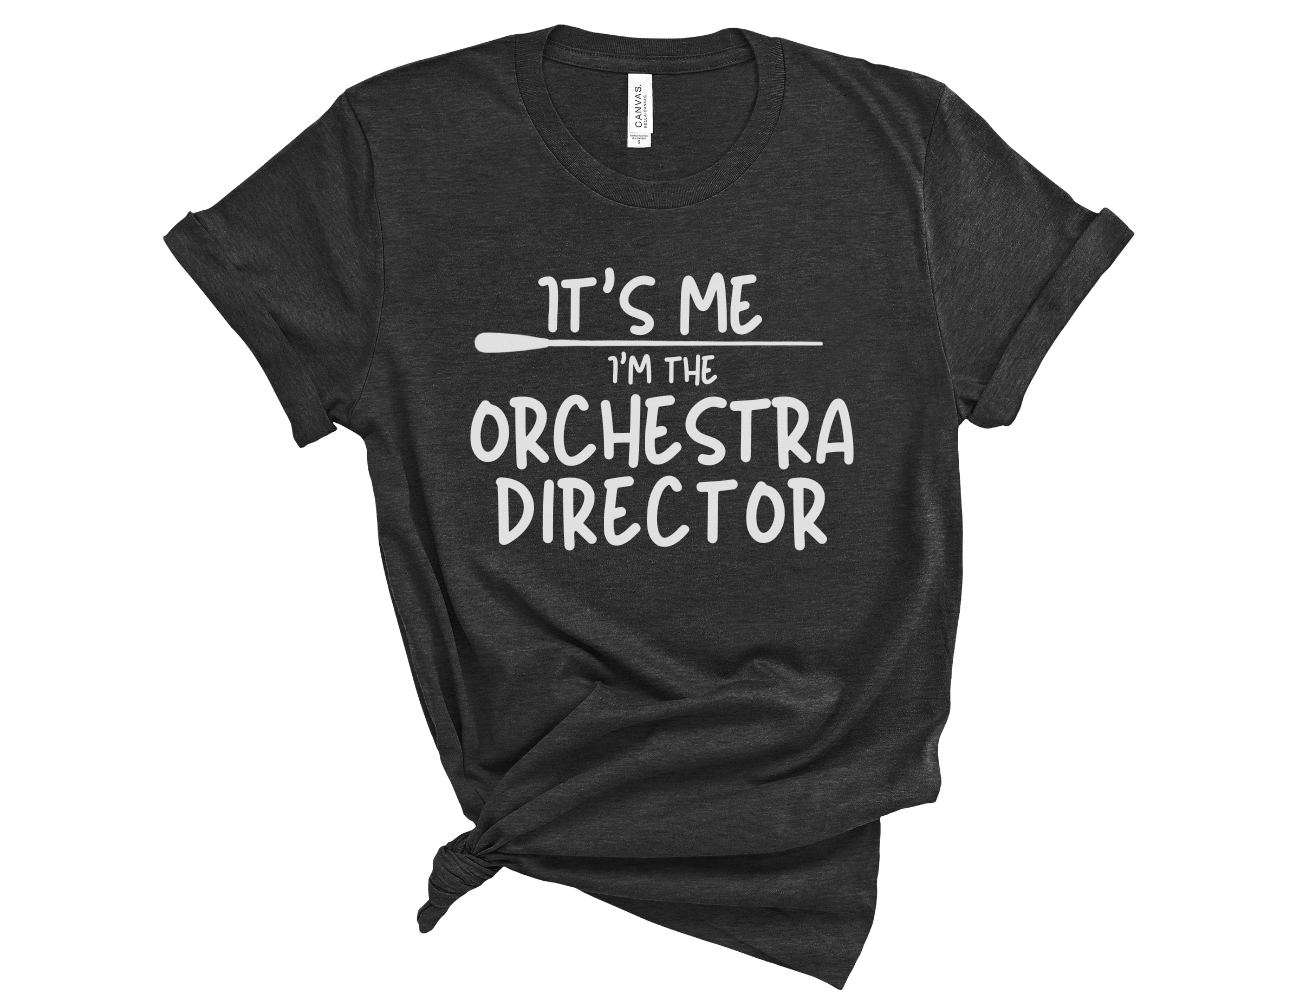 It's Me. I'm the ORCHESTRA DIRECTOR Unisex T-Shirt